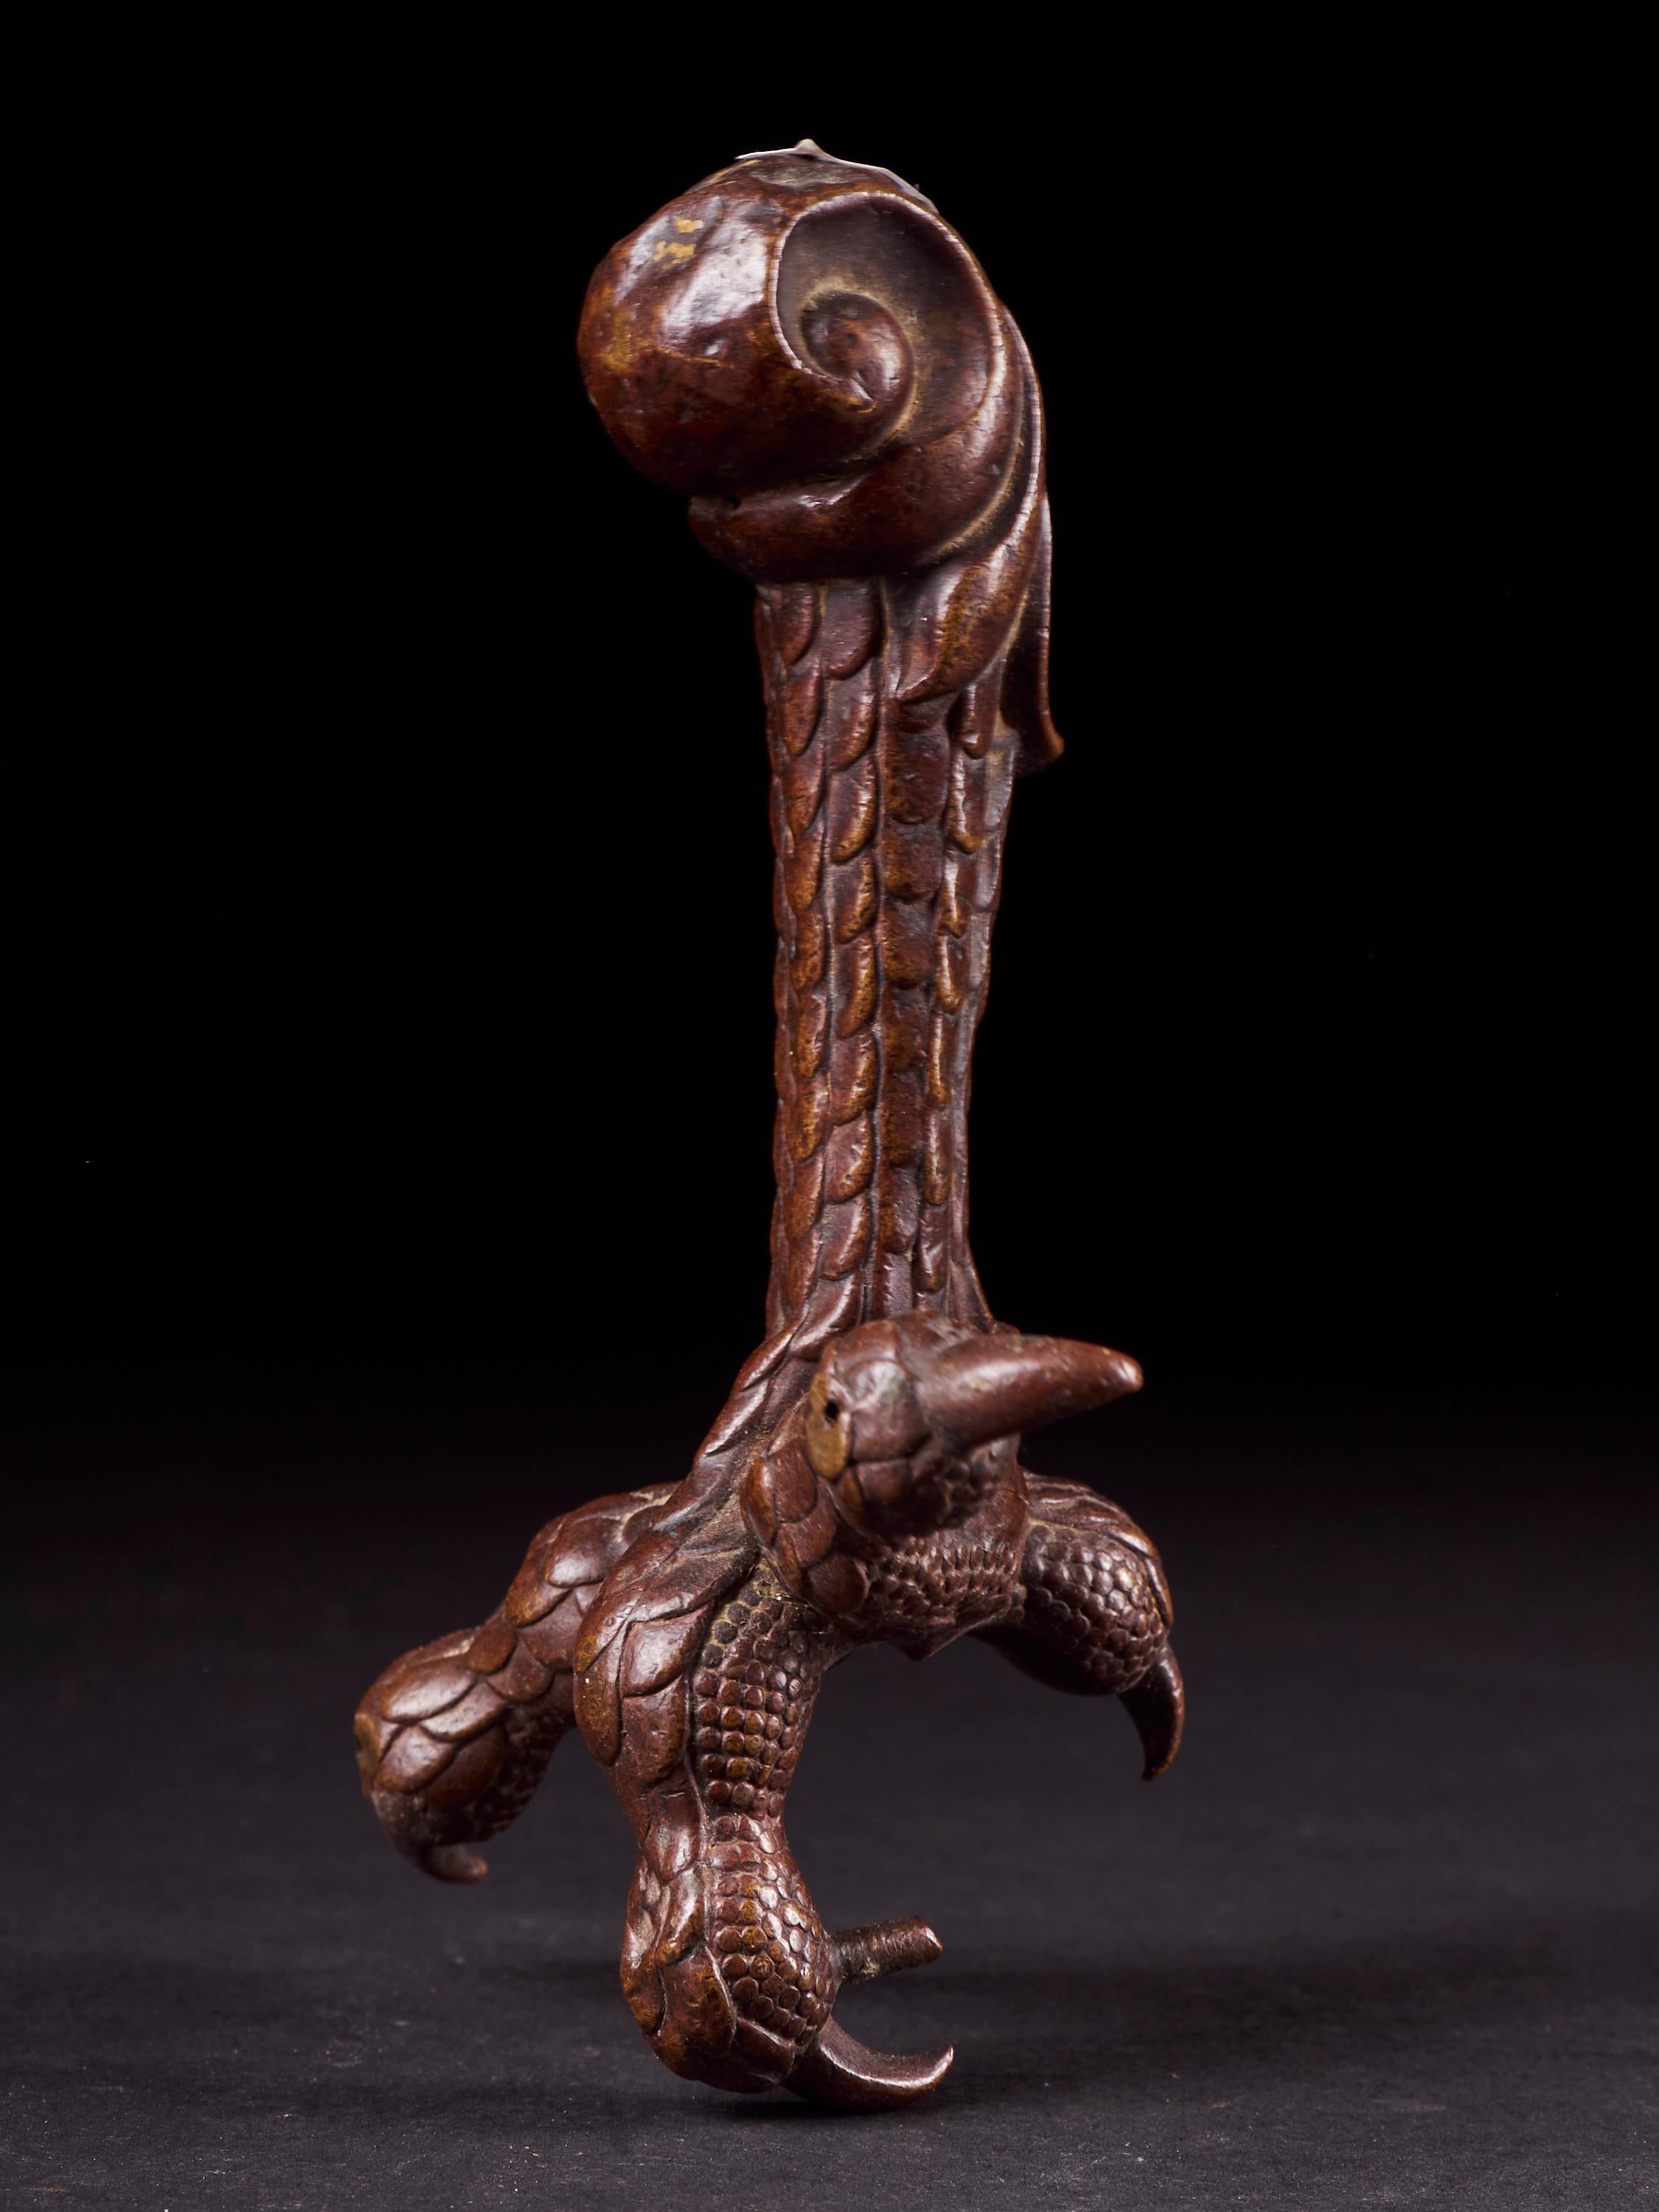 As an inspiring messenger, eagle is frequently associated with strength. Made of copper alloy, this extraordinary decorative item captures the essence of the majesty of the king of birds. A delicate piece of art in excellent condition.